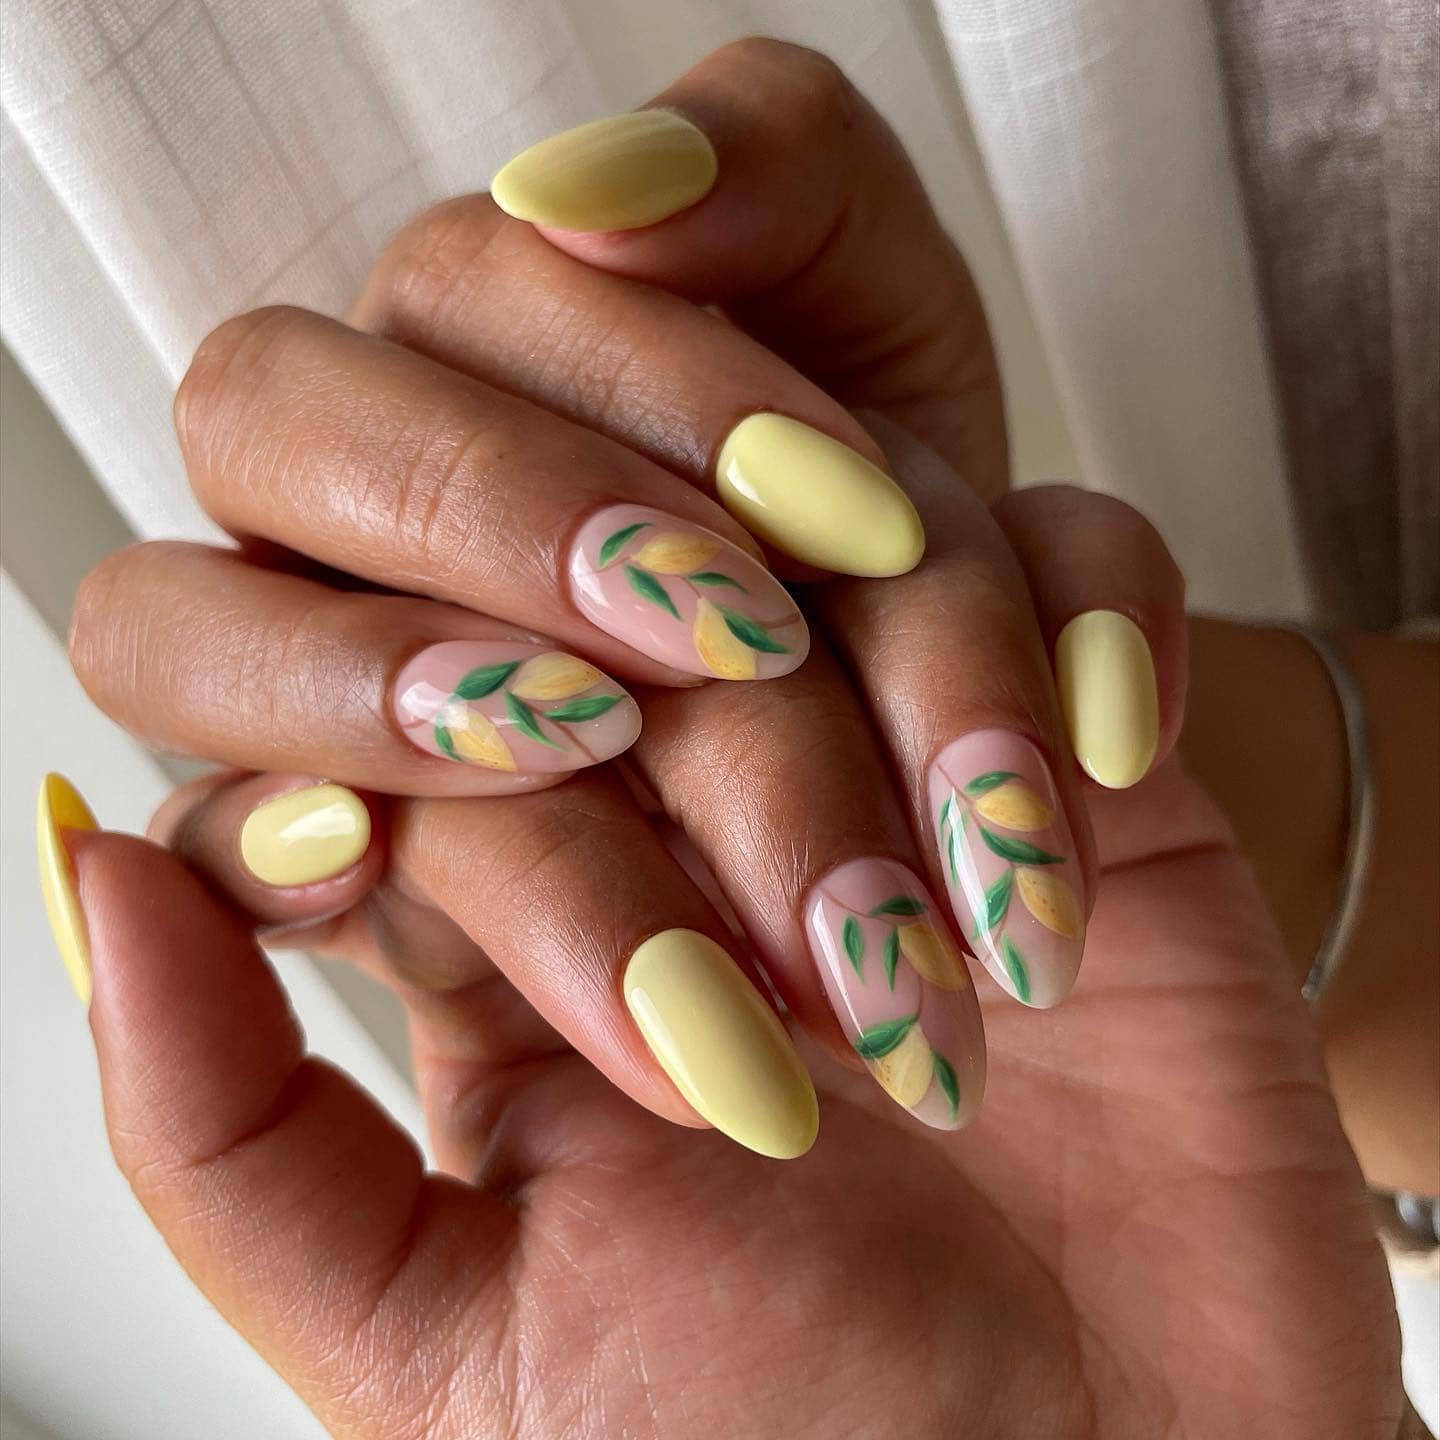 Over 100 Bright Summer Nail Art Designs That Will Be So Trendy images 106